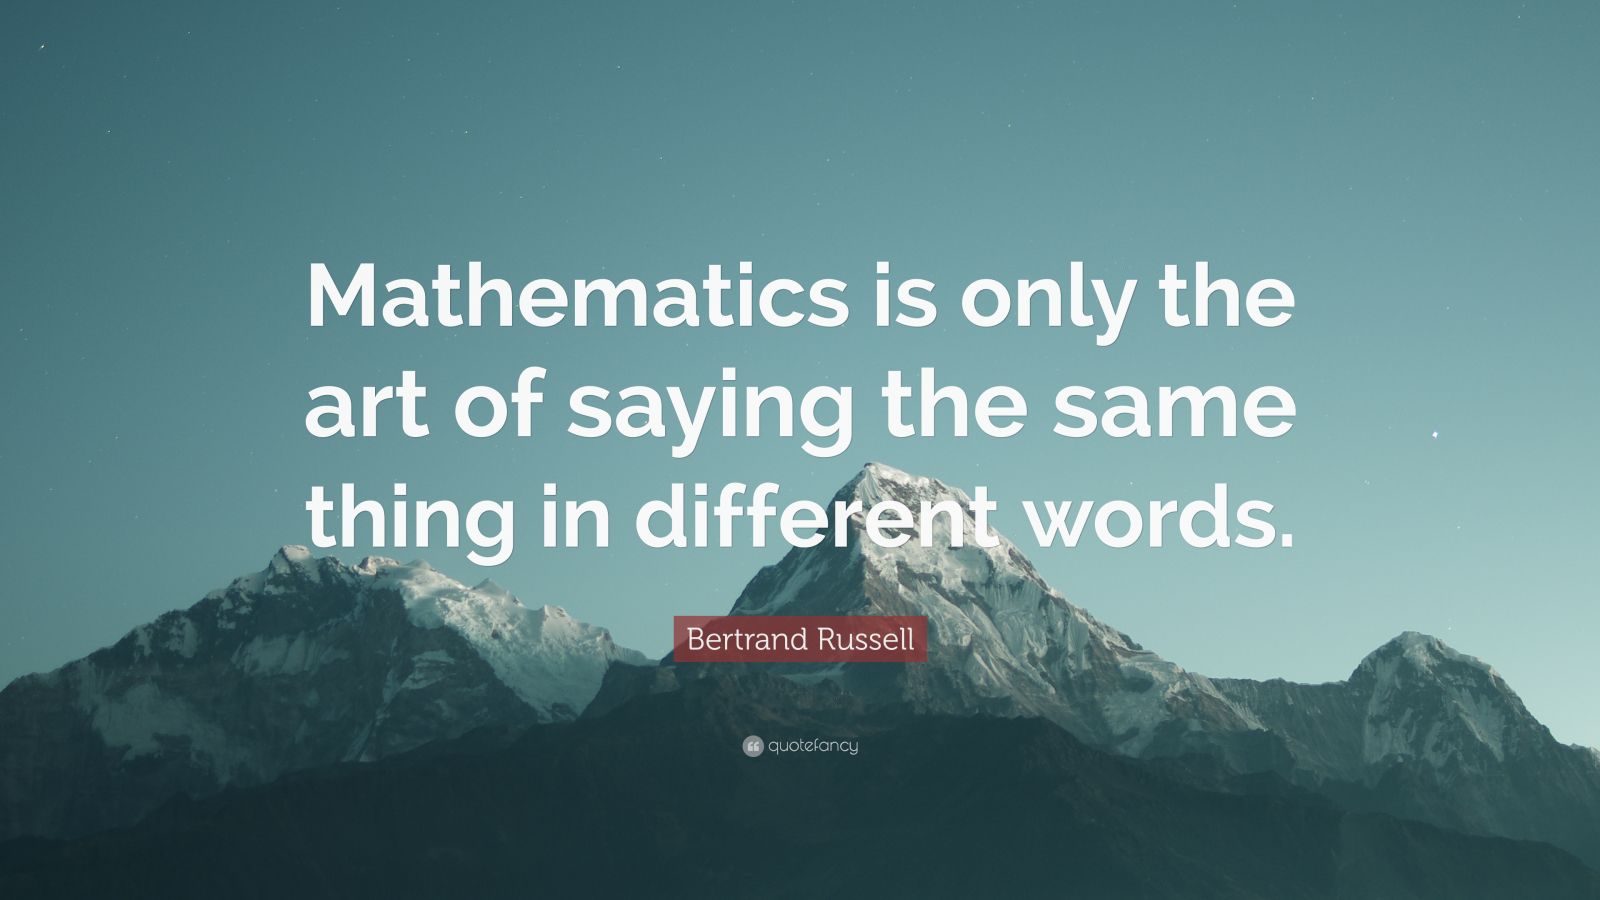 Bertrand Russell Quote Mathematics Is Only The Art Of Saying The Same Thing In Different Words